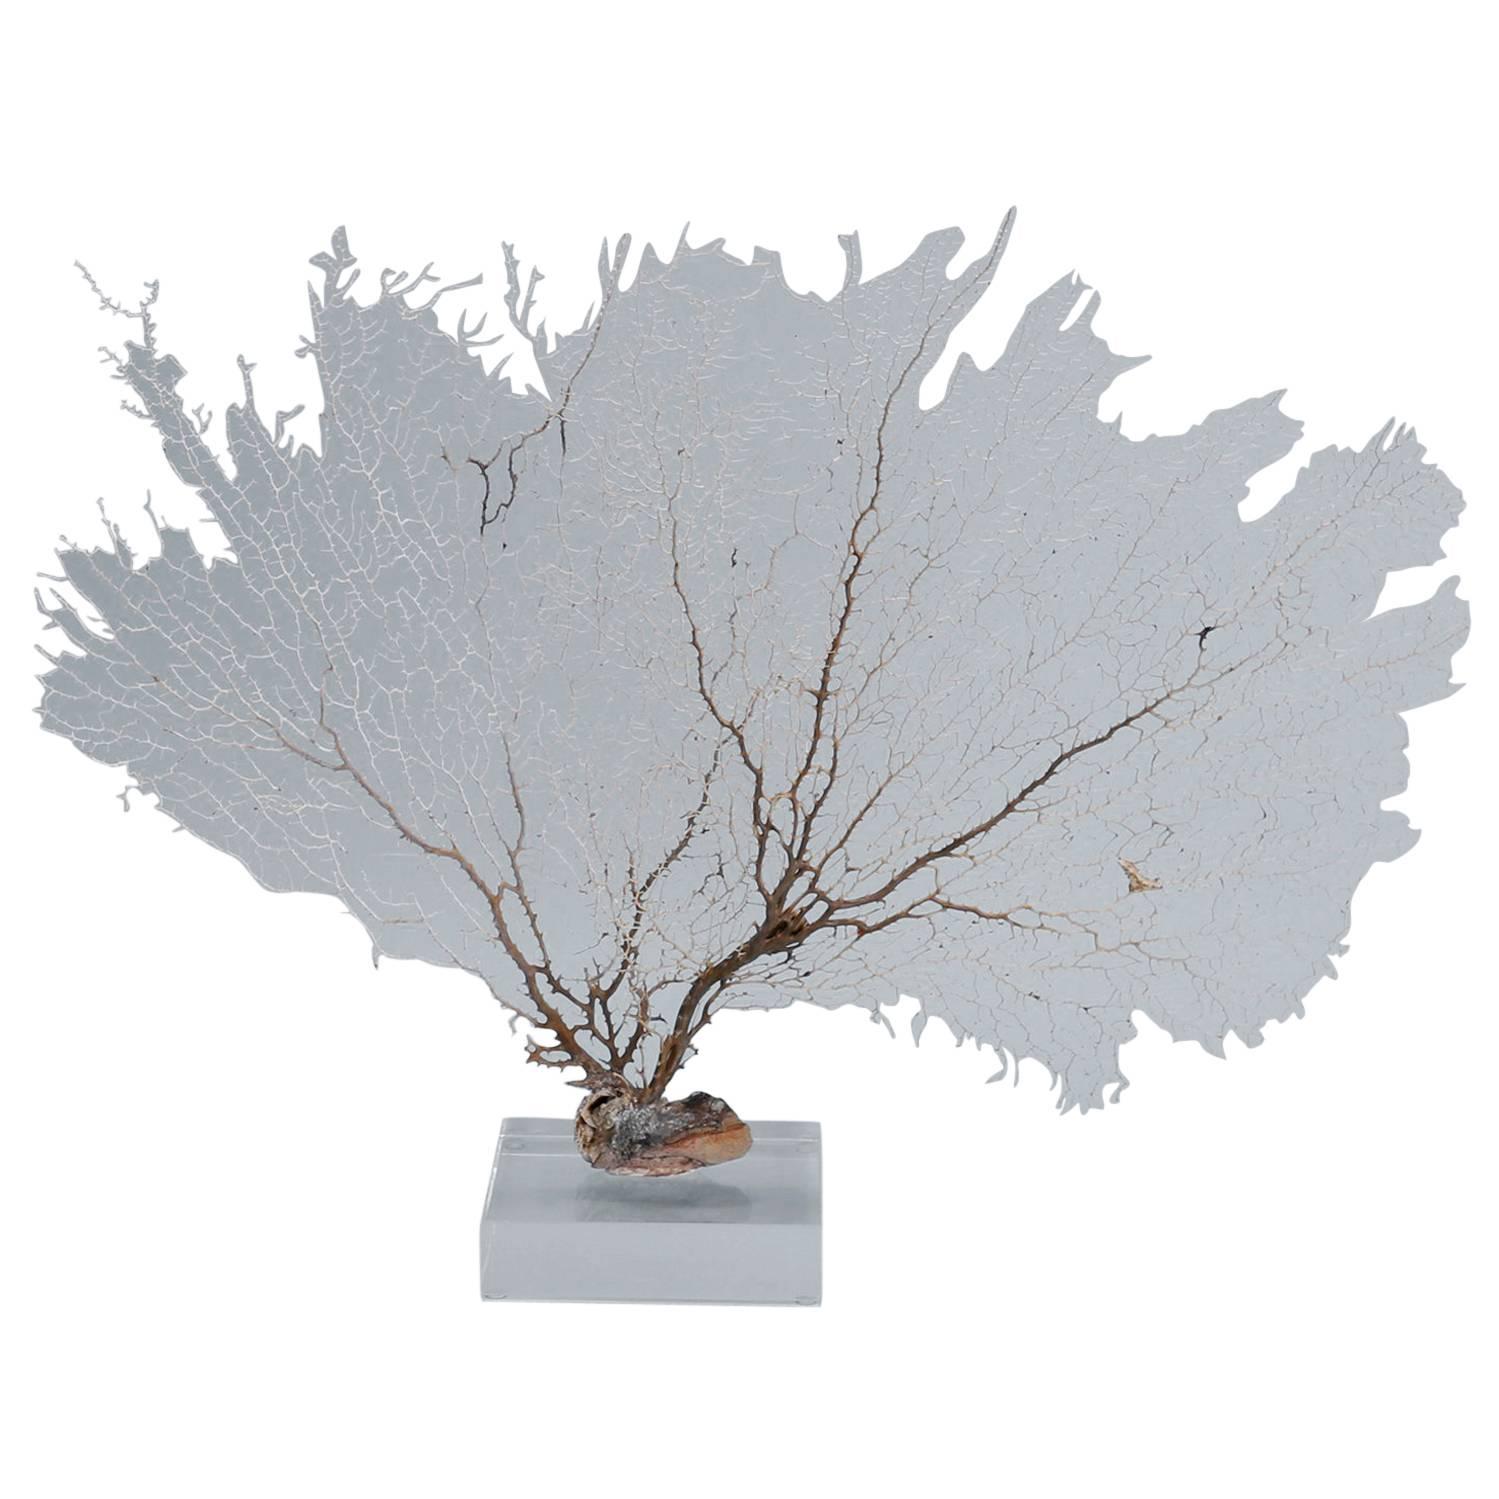 Off-White Sea Fan Mounted on Lucite